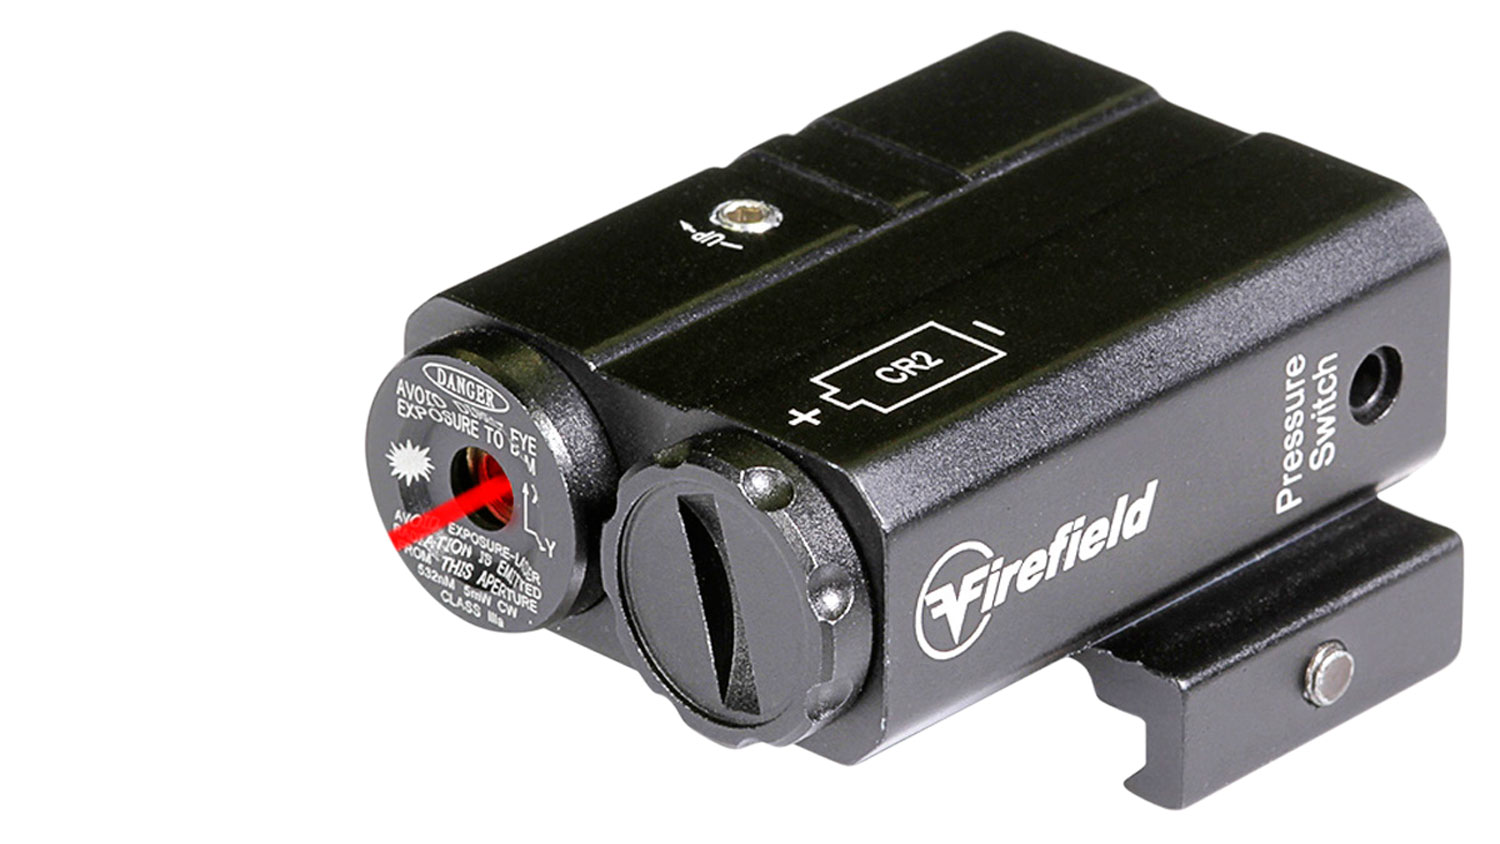 Firefield Charge AR Laser Sight